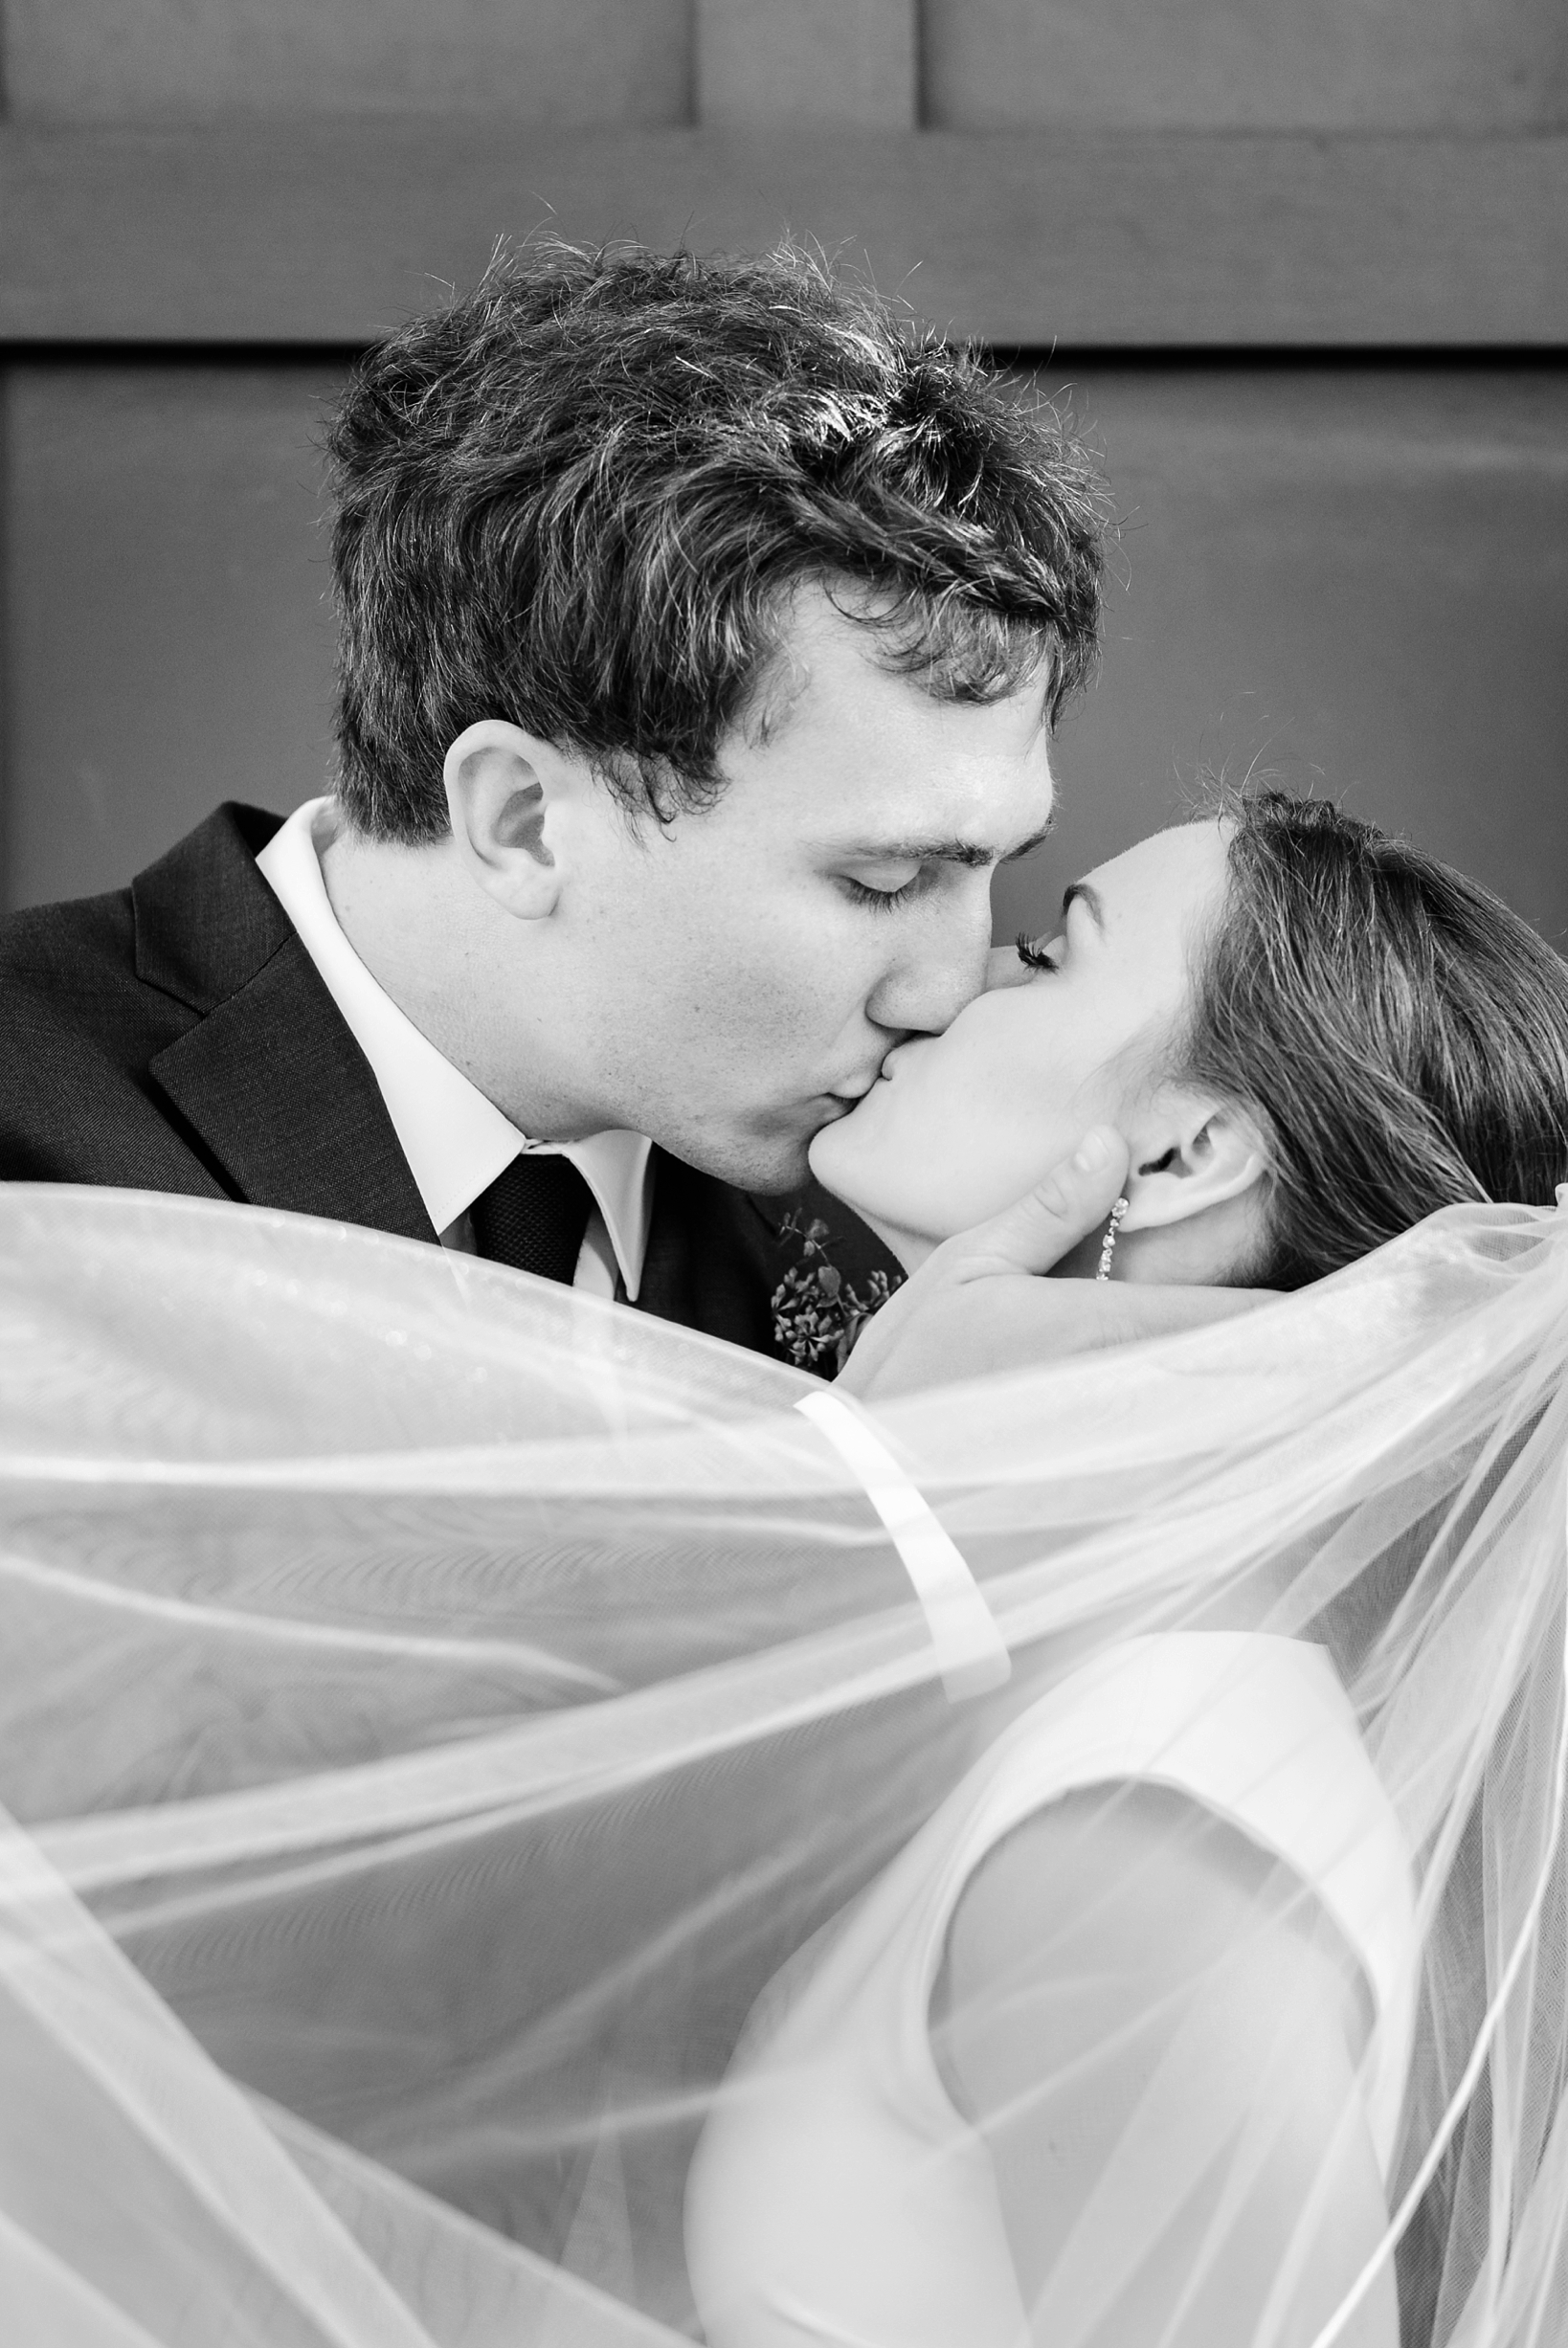 A close-up photo of a kissing couple on their wedding day